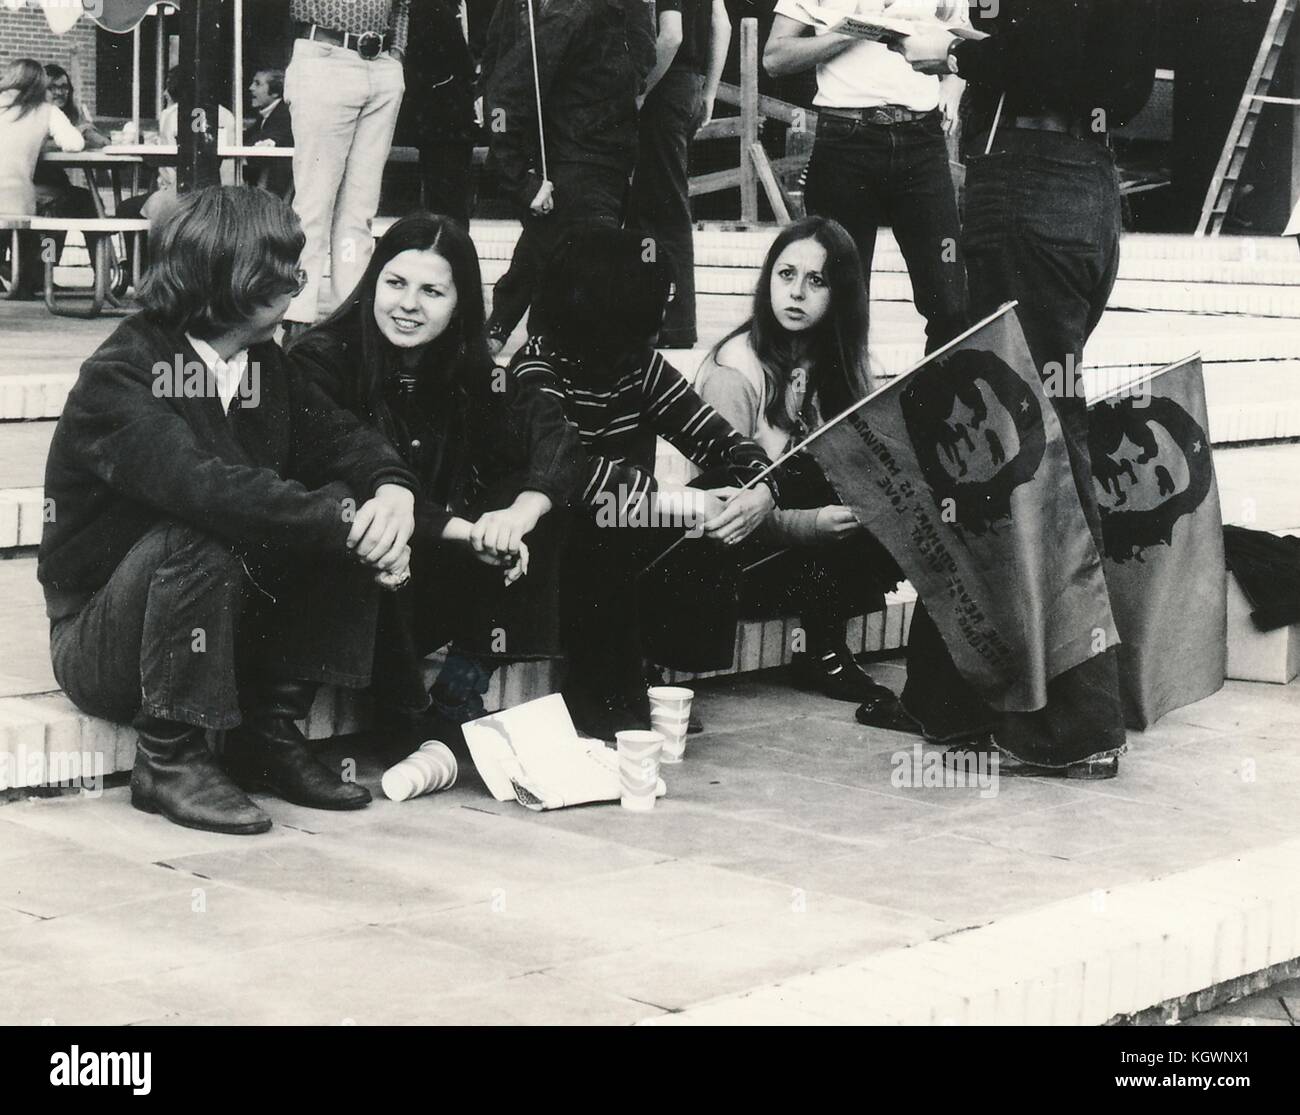 Two male students and two female students all wearing hippie attire sit together and talk on a set of steps, with two students holding flags with the face of revolutionary Che Guevara, during an anti Vietnam War student sit-in protest at North Carolina State University, Raleigh, North Carolina, 1970. () Stock Photo